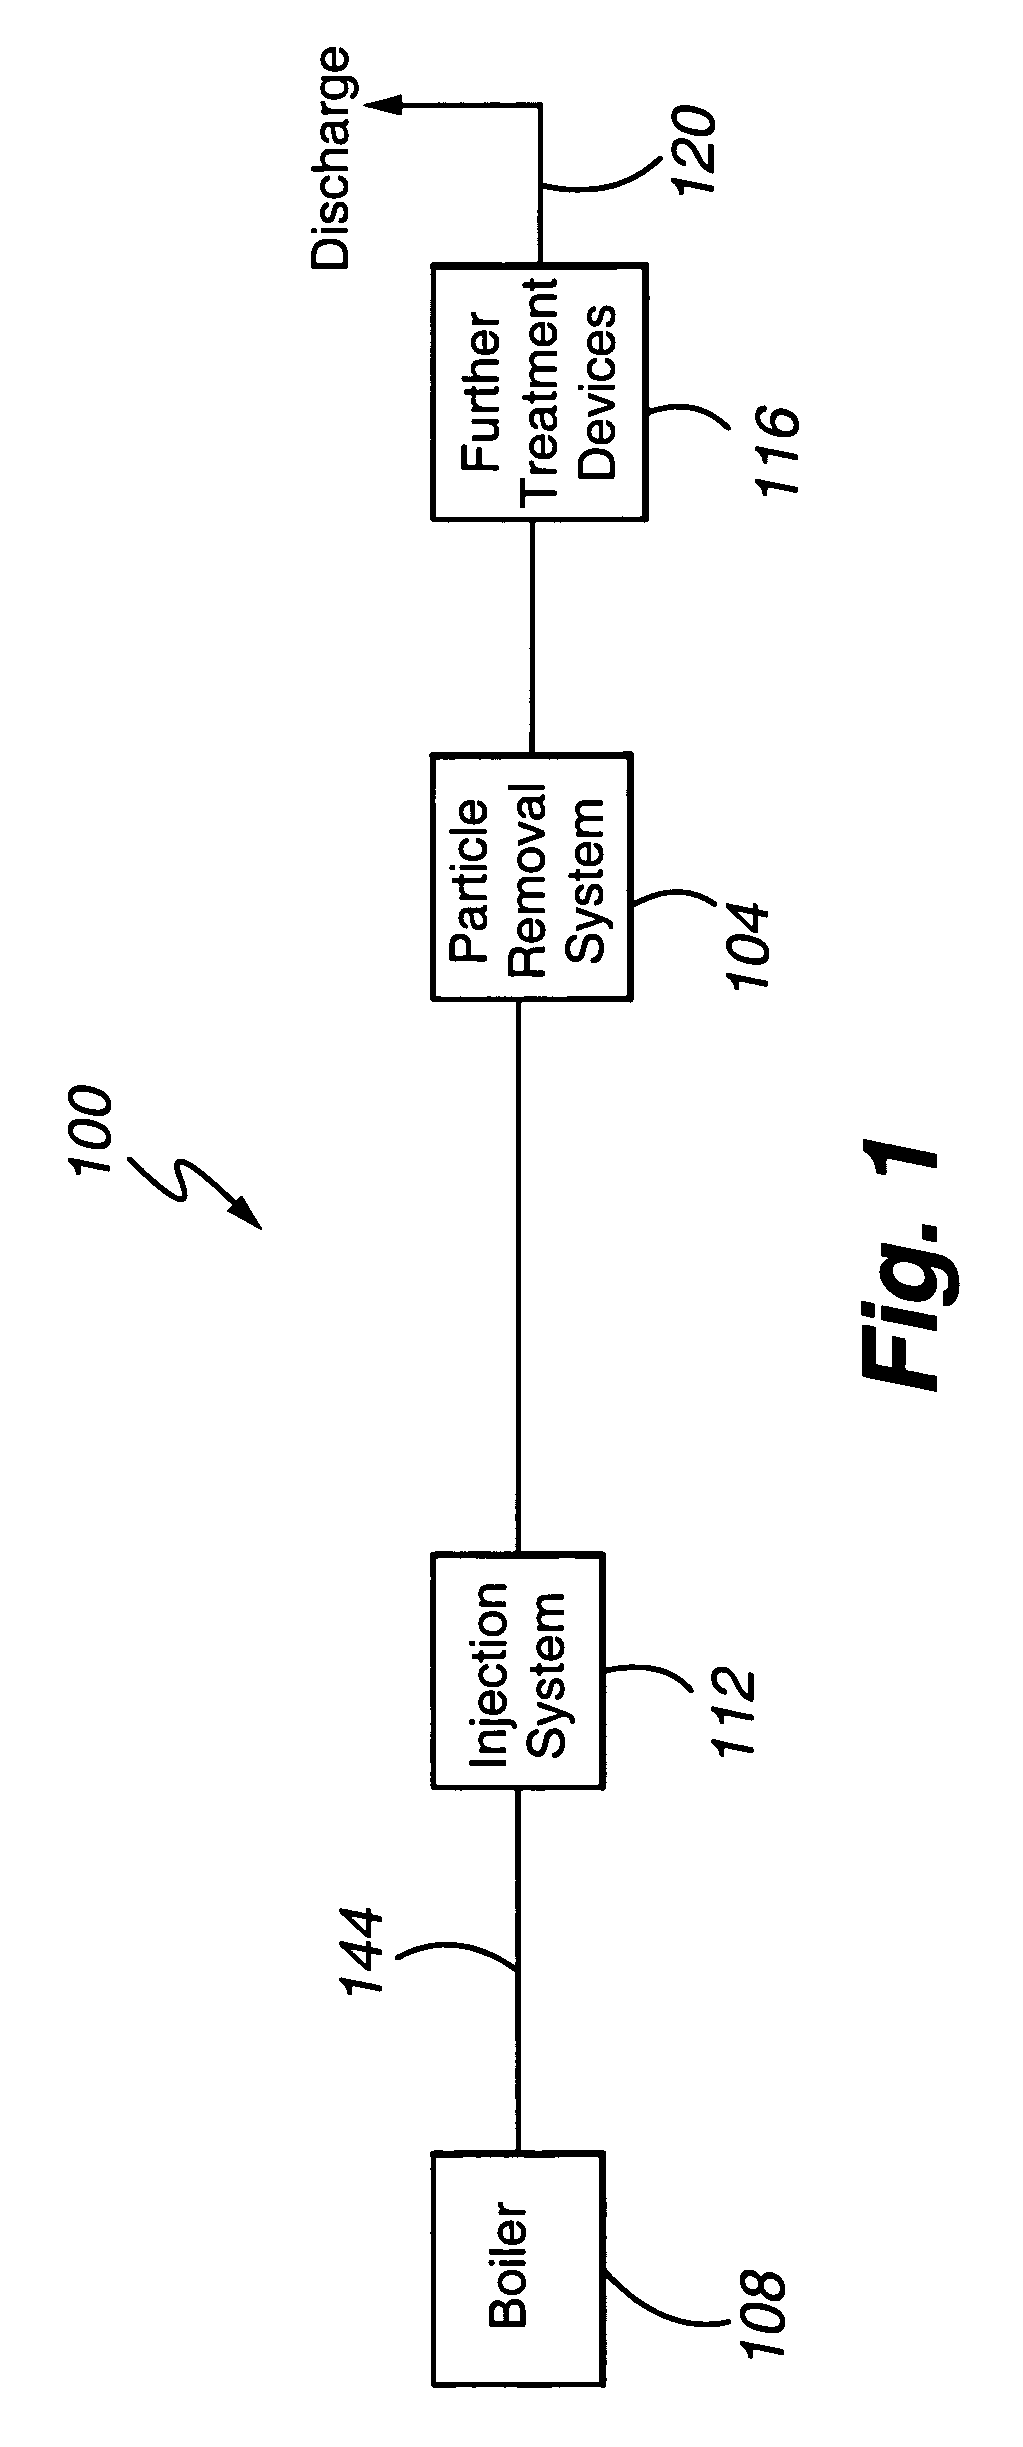 Apparatus and process for preparing sorbents for mercury control at the point of use